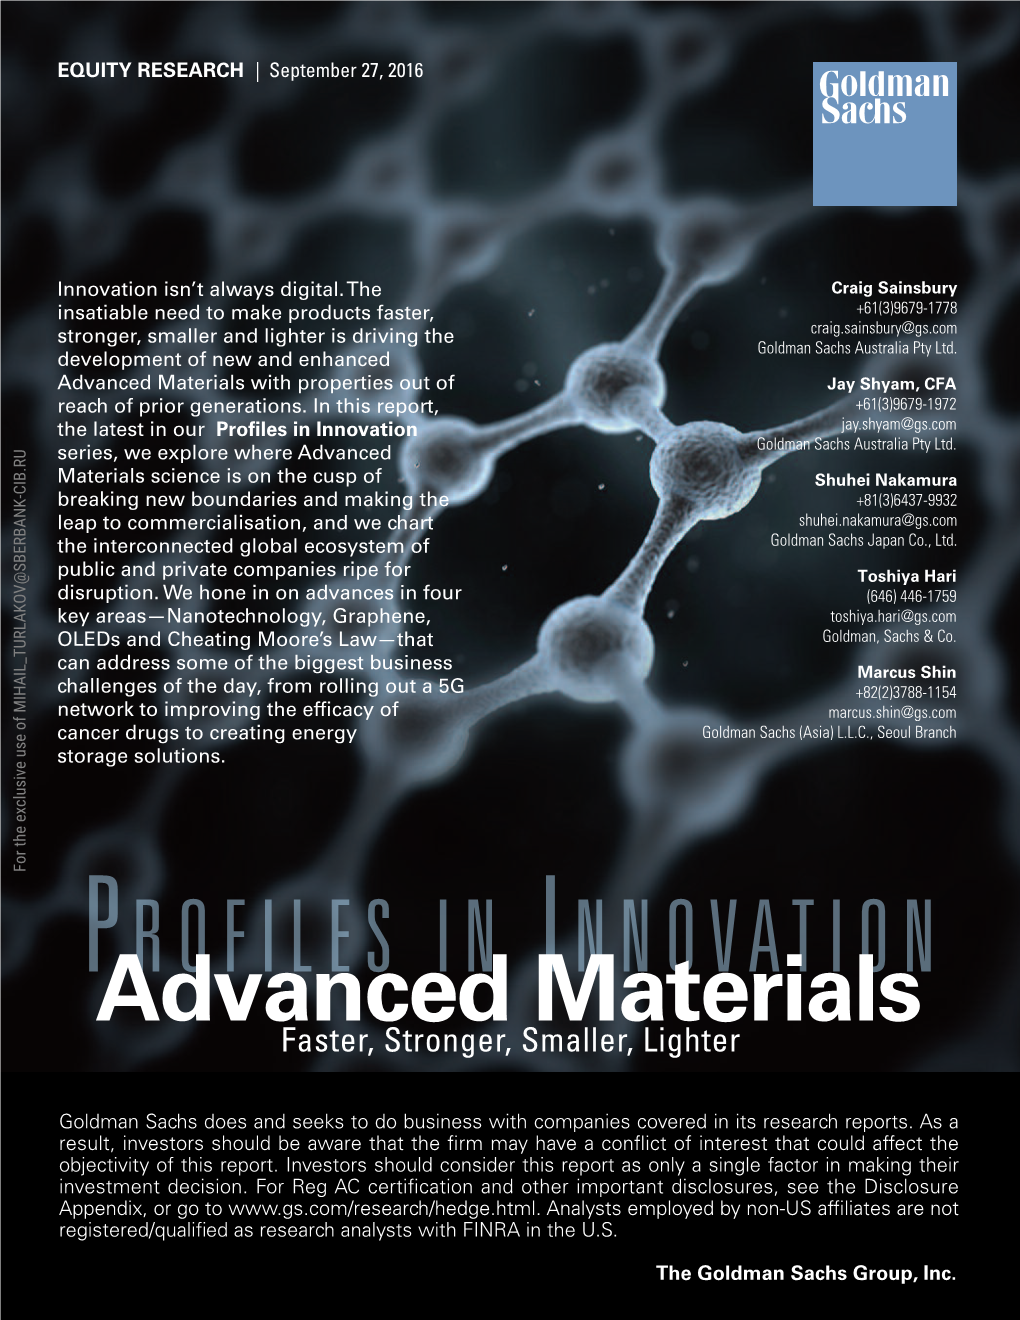 Advanced Materials with Properties out of Jay Shyam, CFA Reach of Prior Generations